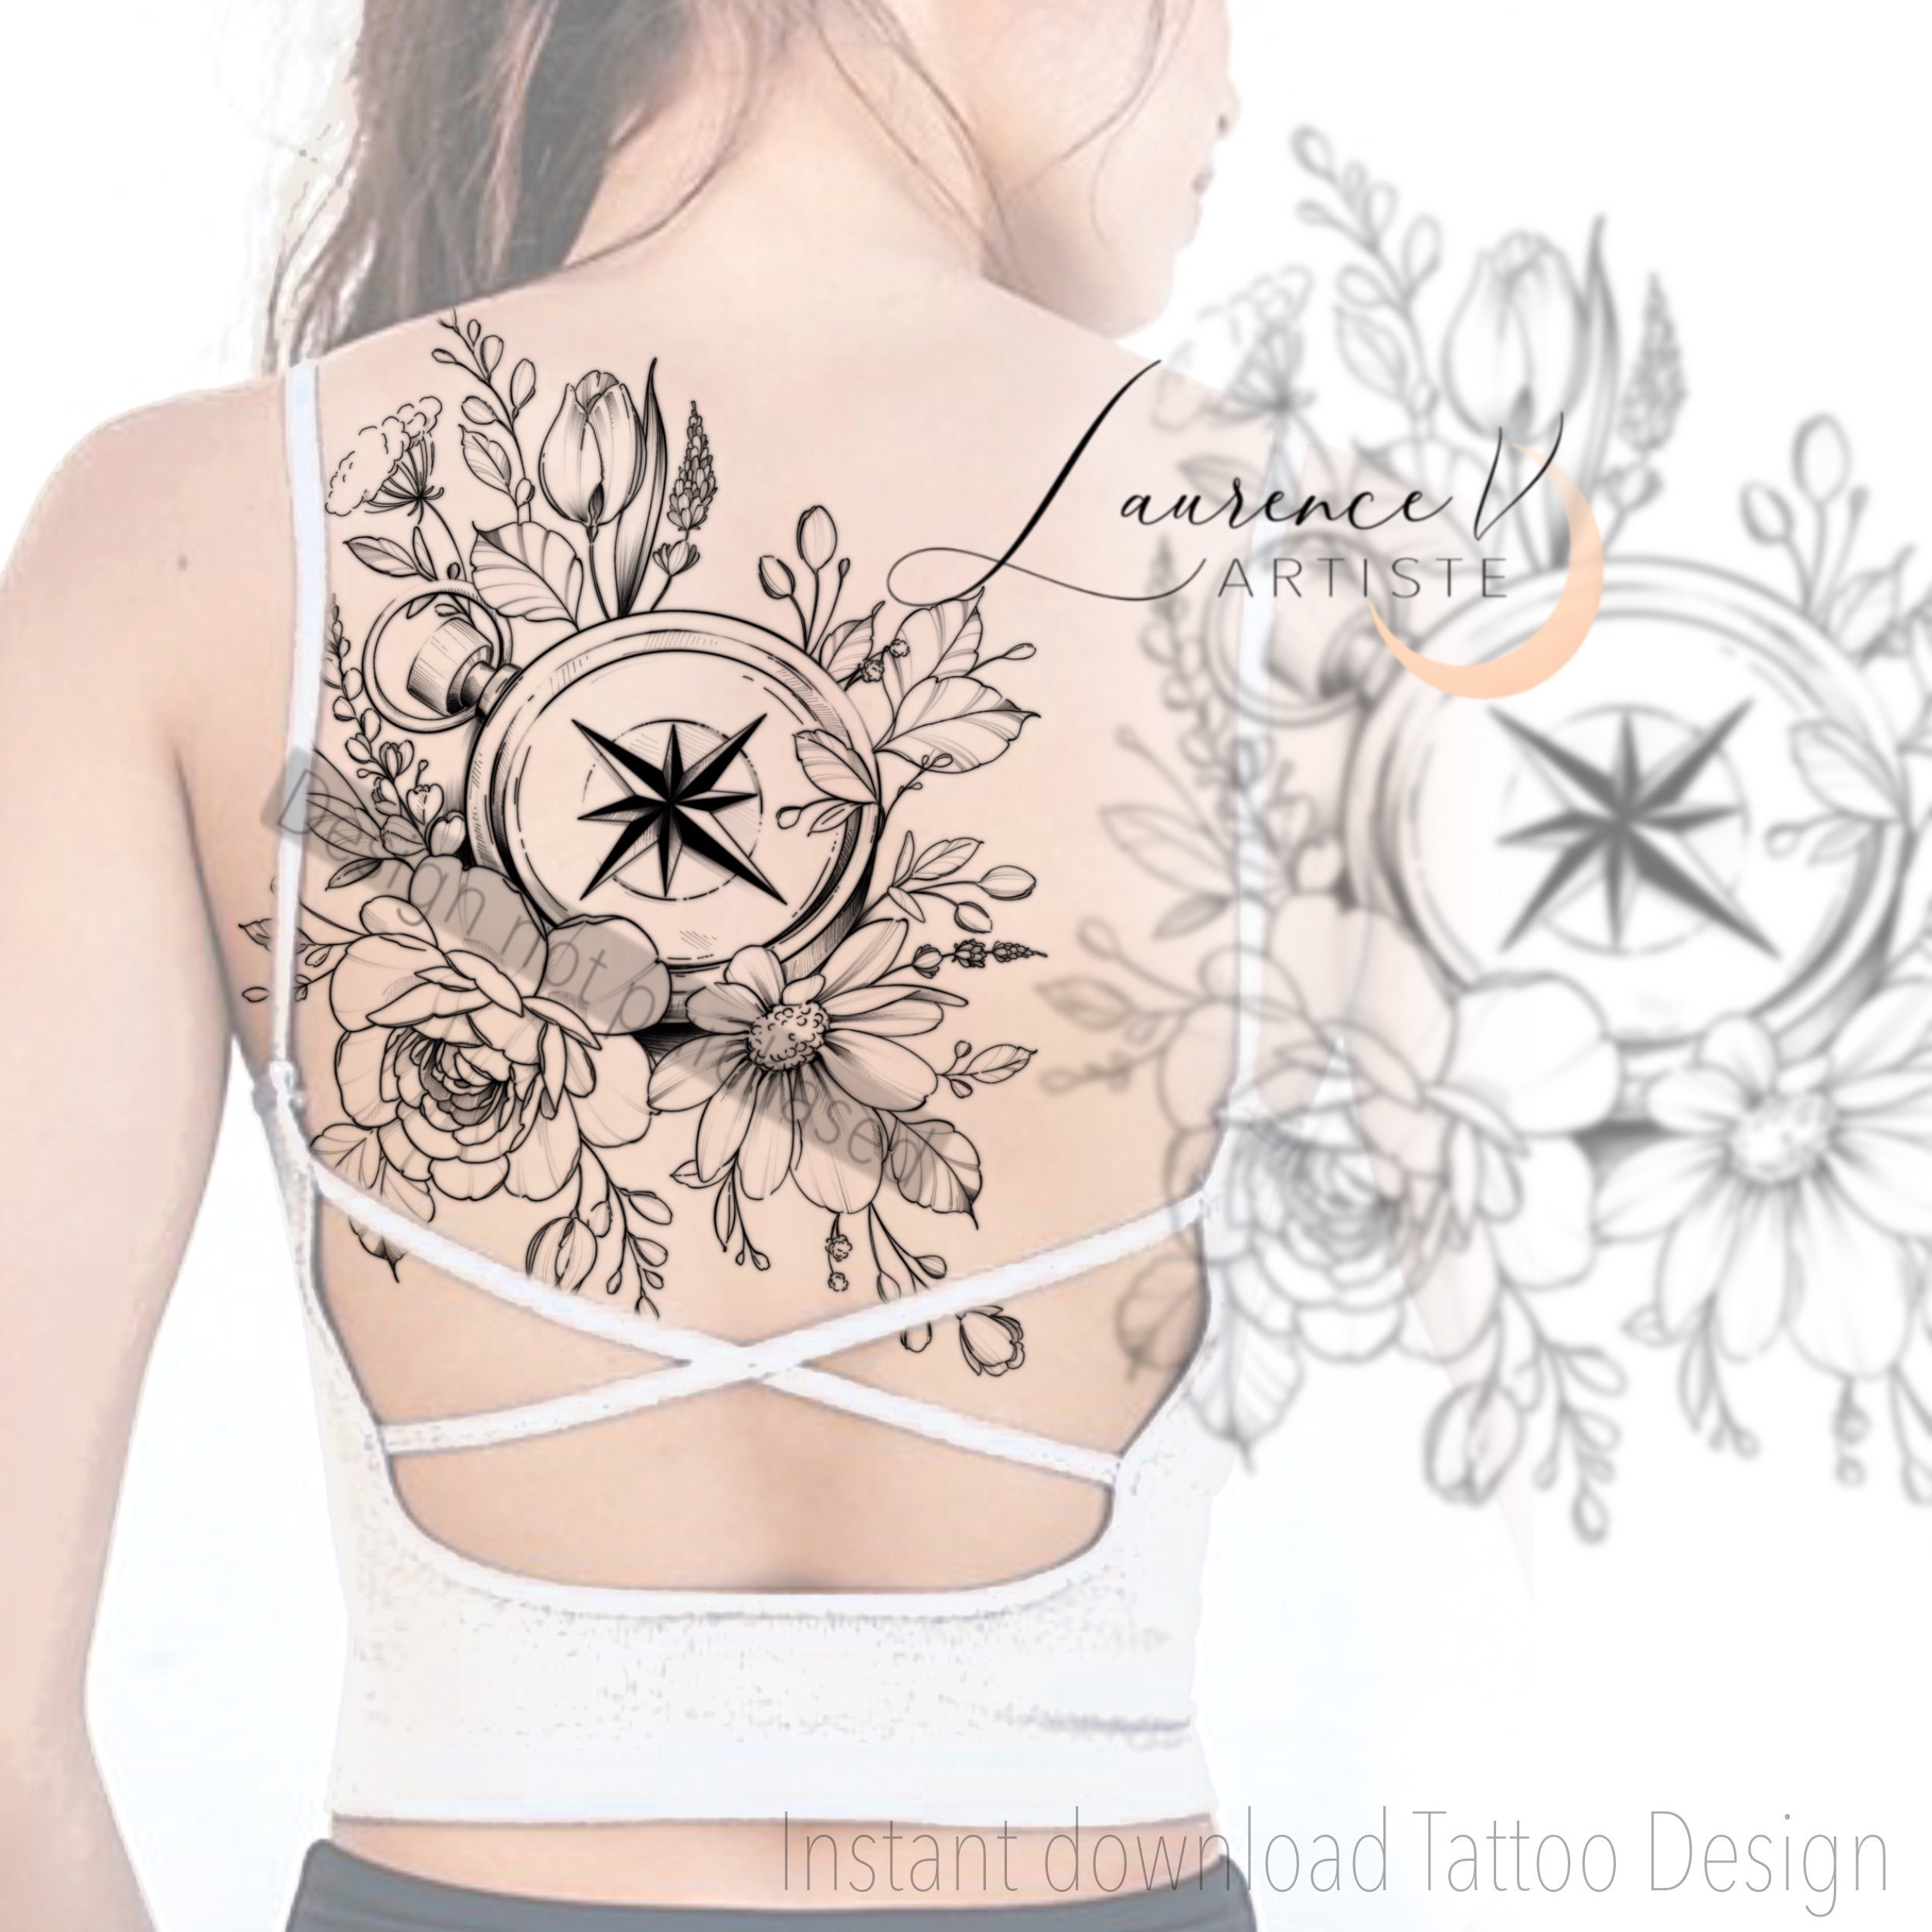 Instant Download Tattoo Design Compass and Wildflowers - Etsy Sweden